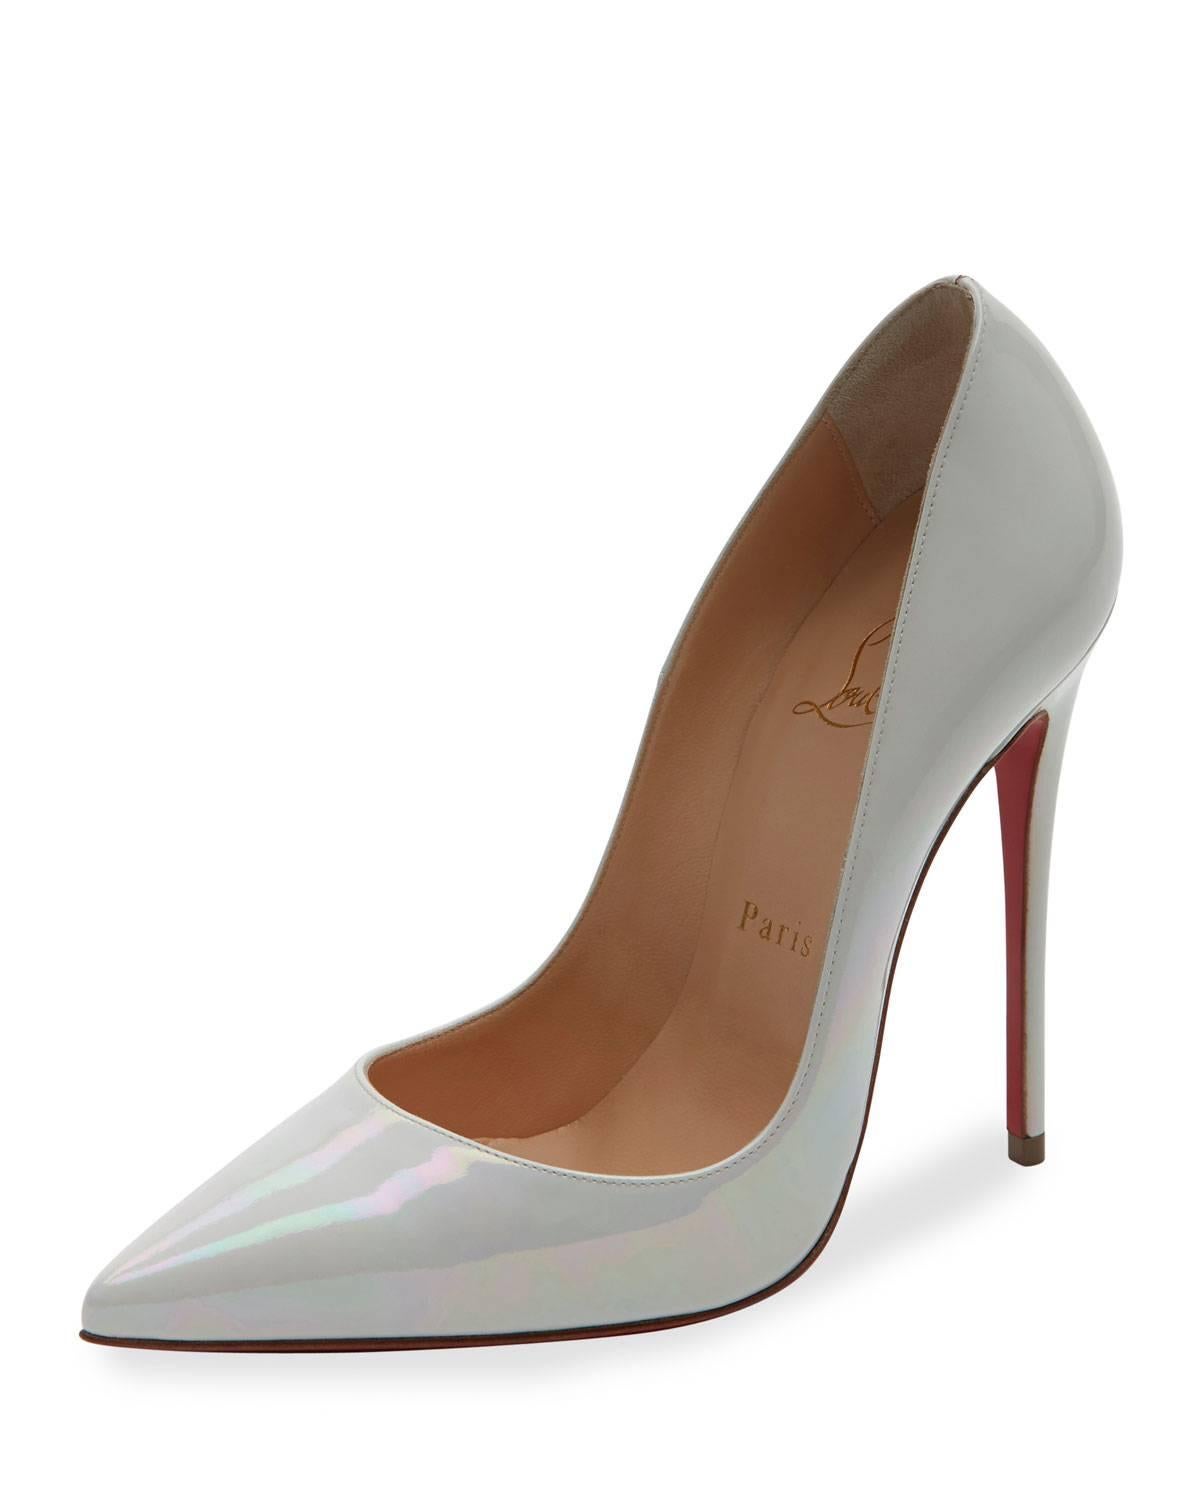 CURATOR'S NOTES

ONLY PAIR IN THIS SIZE!  Christian Louboutin New Pearlescent So Kate Evening High Heels Pumps in Box  

Size IT 36.5
Patent leather
Slip on 
Made in Italy
Heel height 5" (120mm)
Includes original Christian Louboutin dust bag